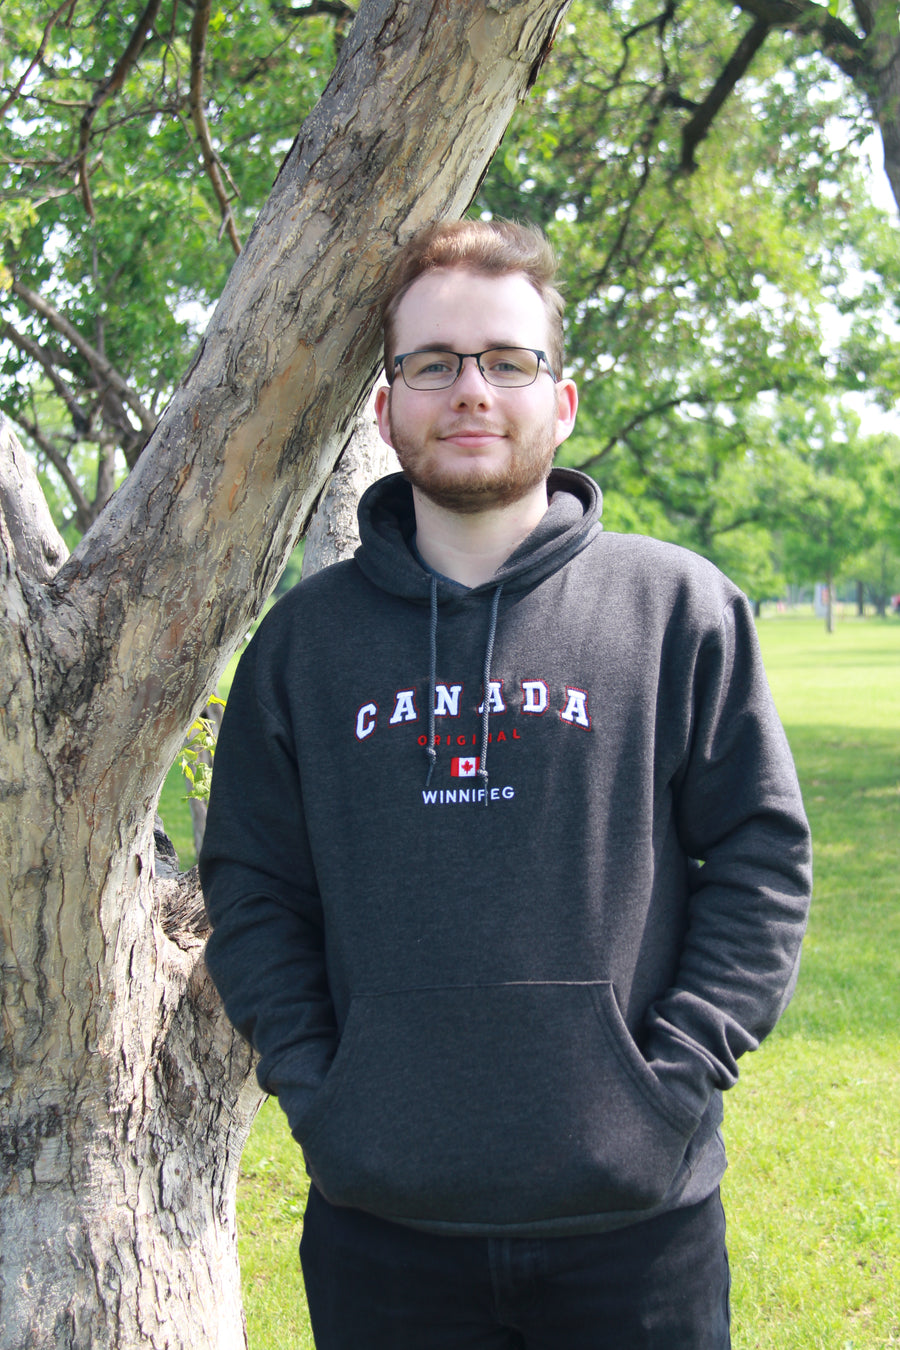 EMBROIDERED CANADA HOODIE